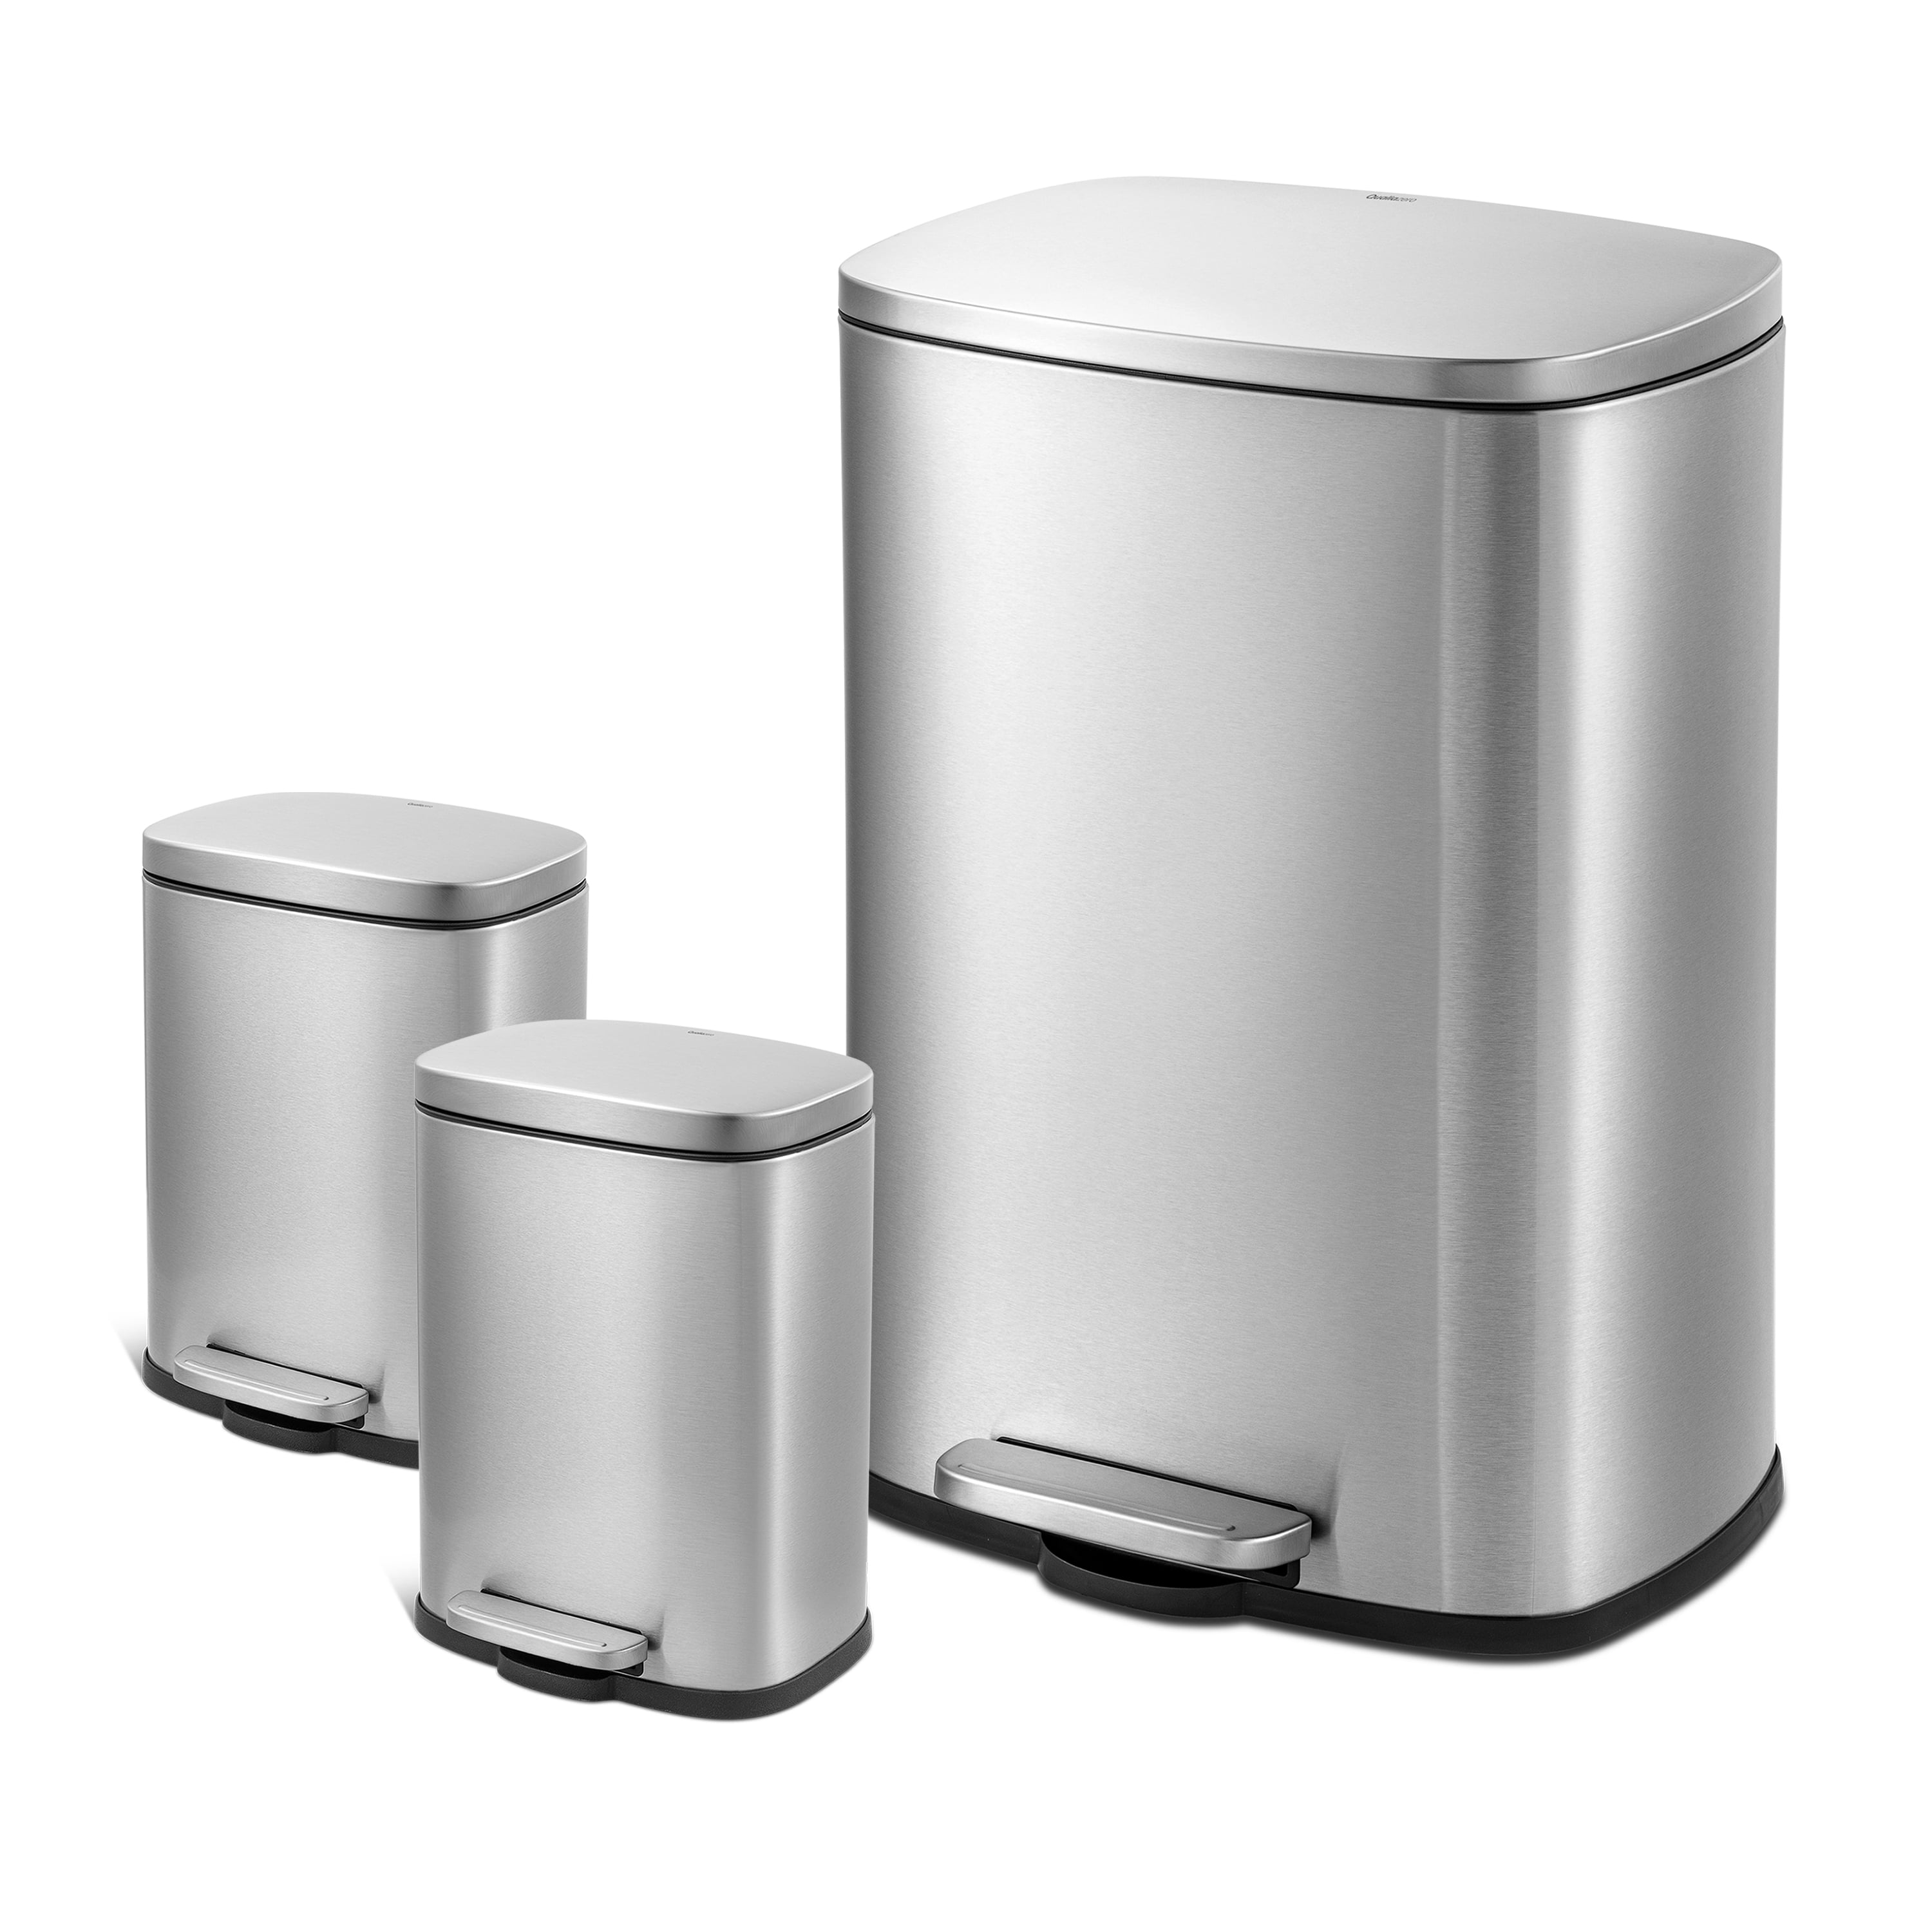 Qualiazero Rectangular Step Garbage Can 3 Piece Combo, 13.2 gal , Two 1.3 gal, Stainless Steel